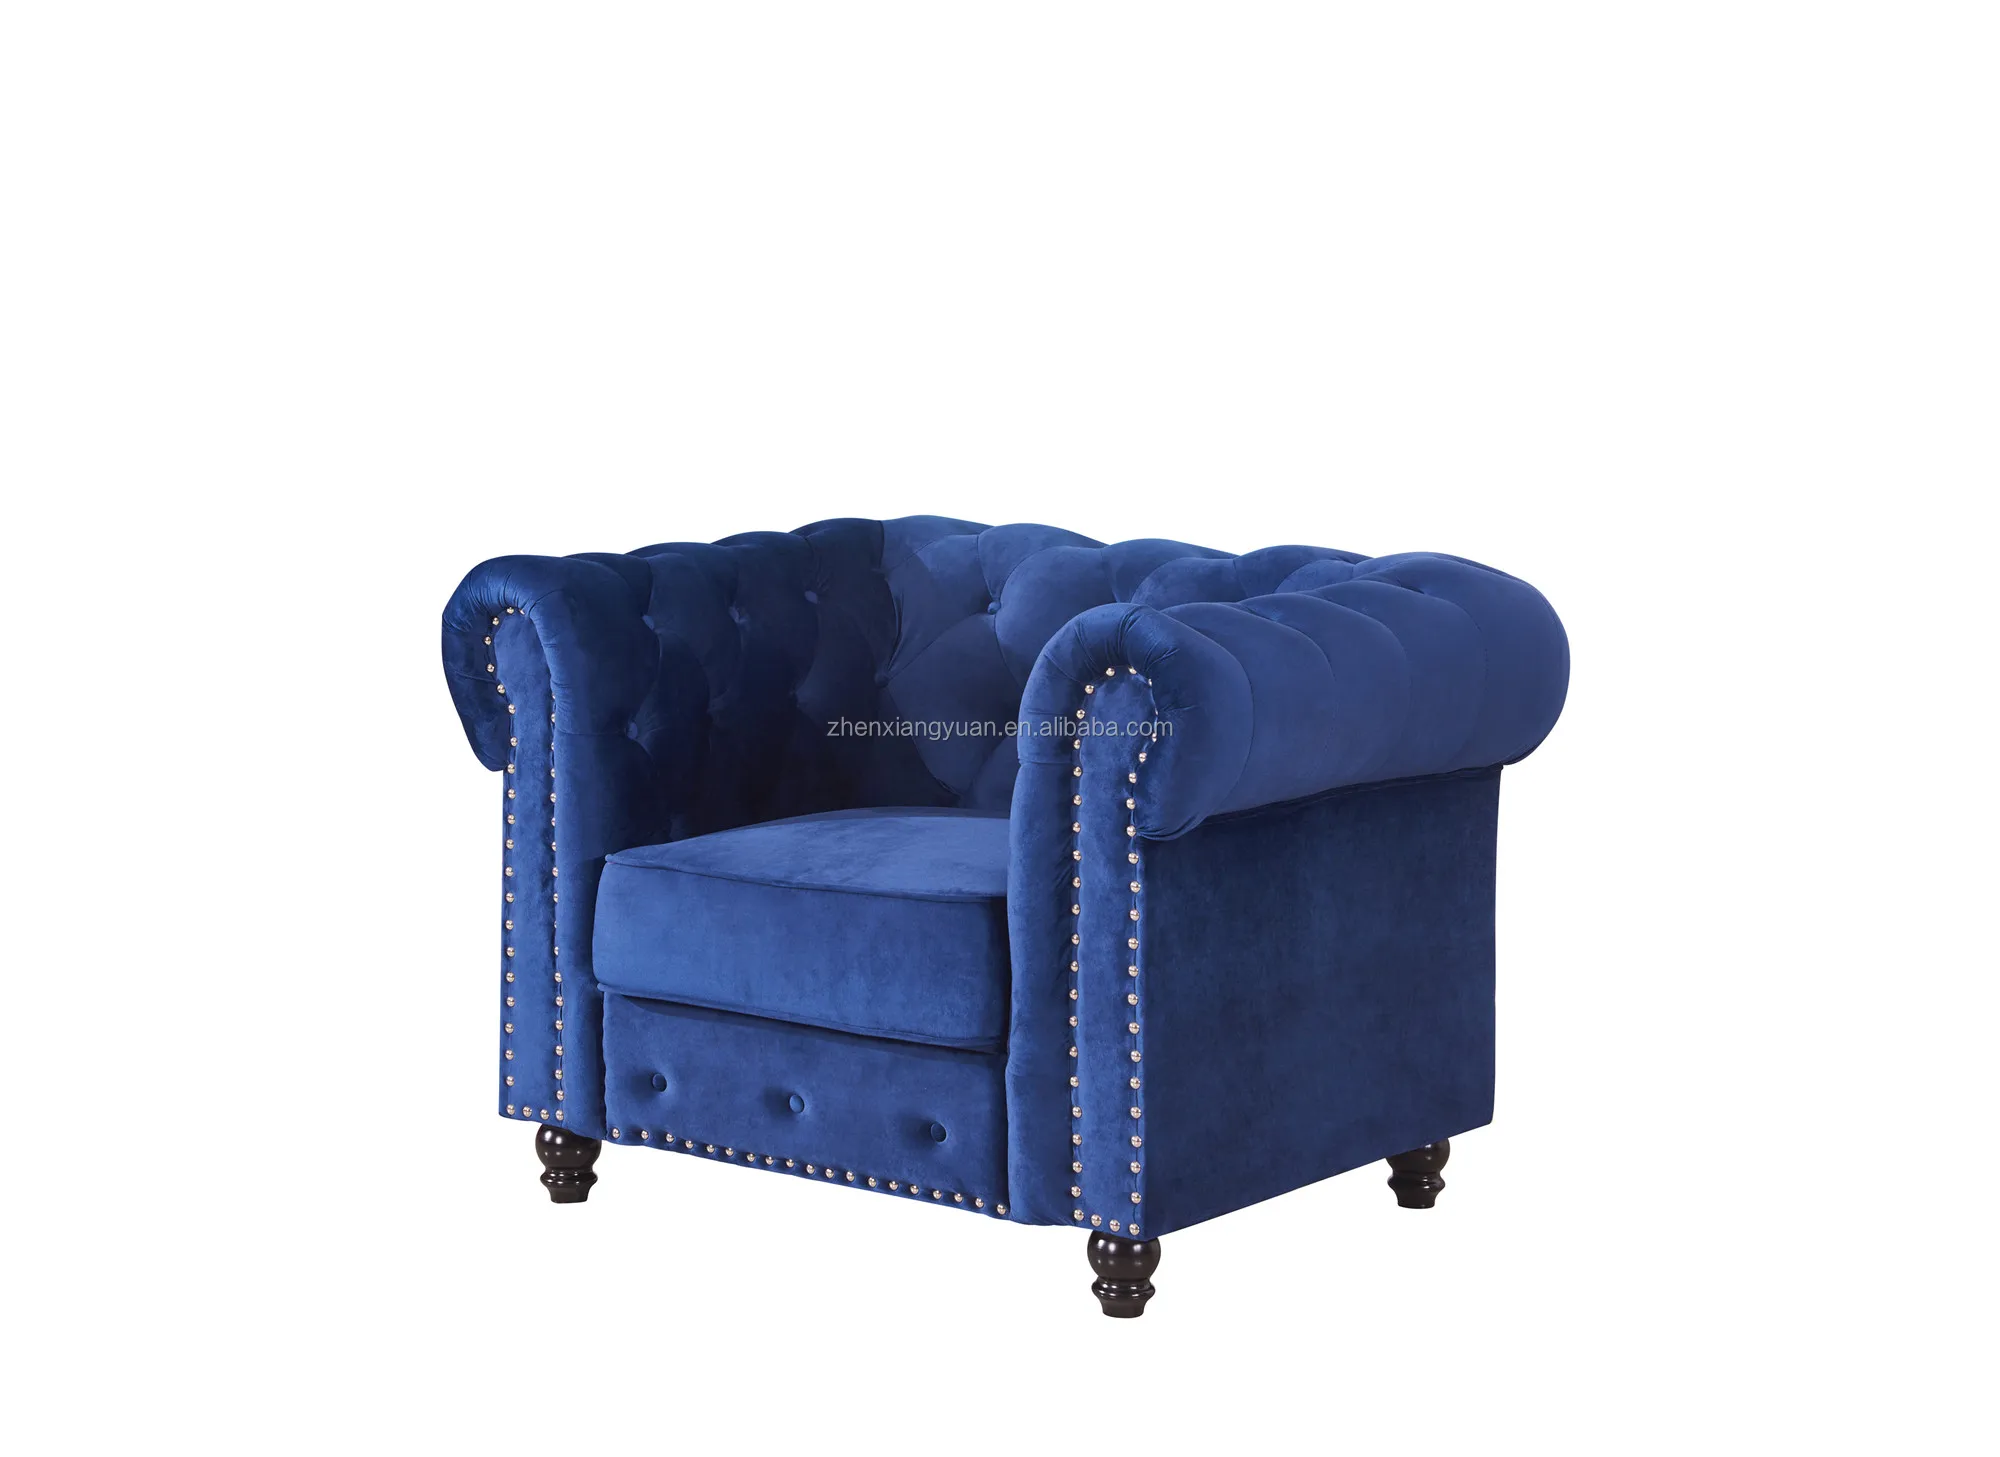 Wholesale Furniture Factory Direct Blue Velvet Chesterfield Sofa Living Room Couch Furniture